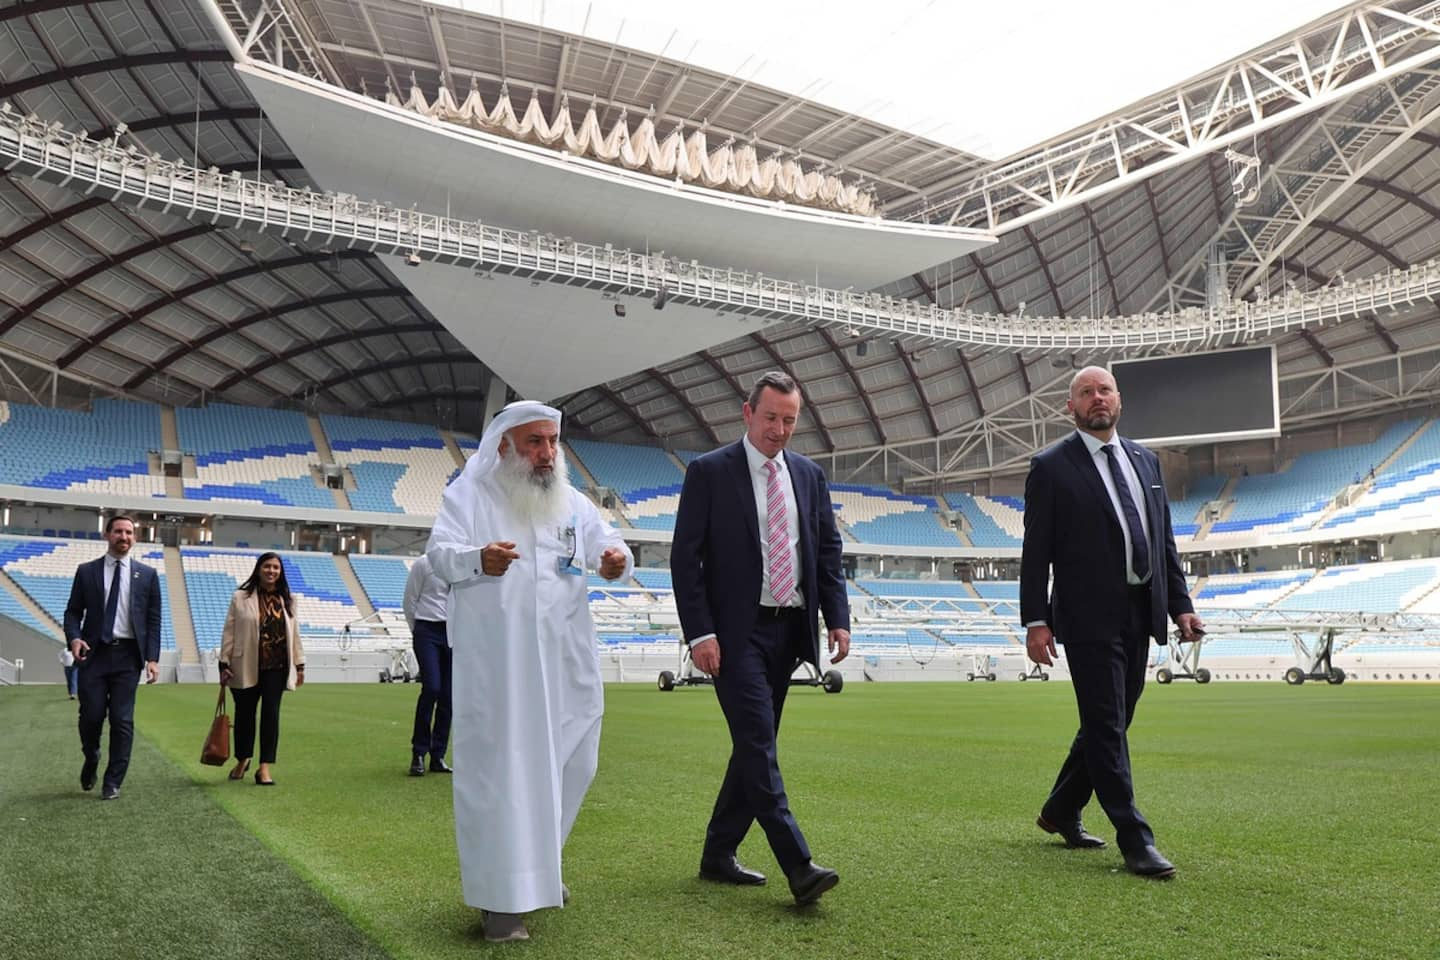 No alcohol in Qatar stadiums for the 2022 World Cup